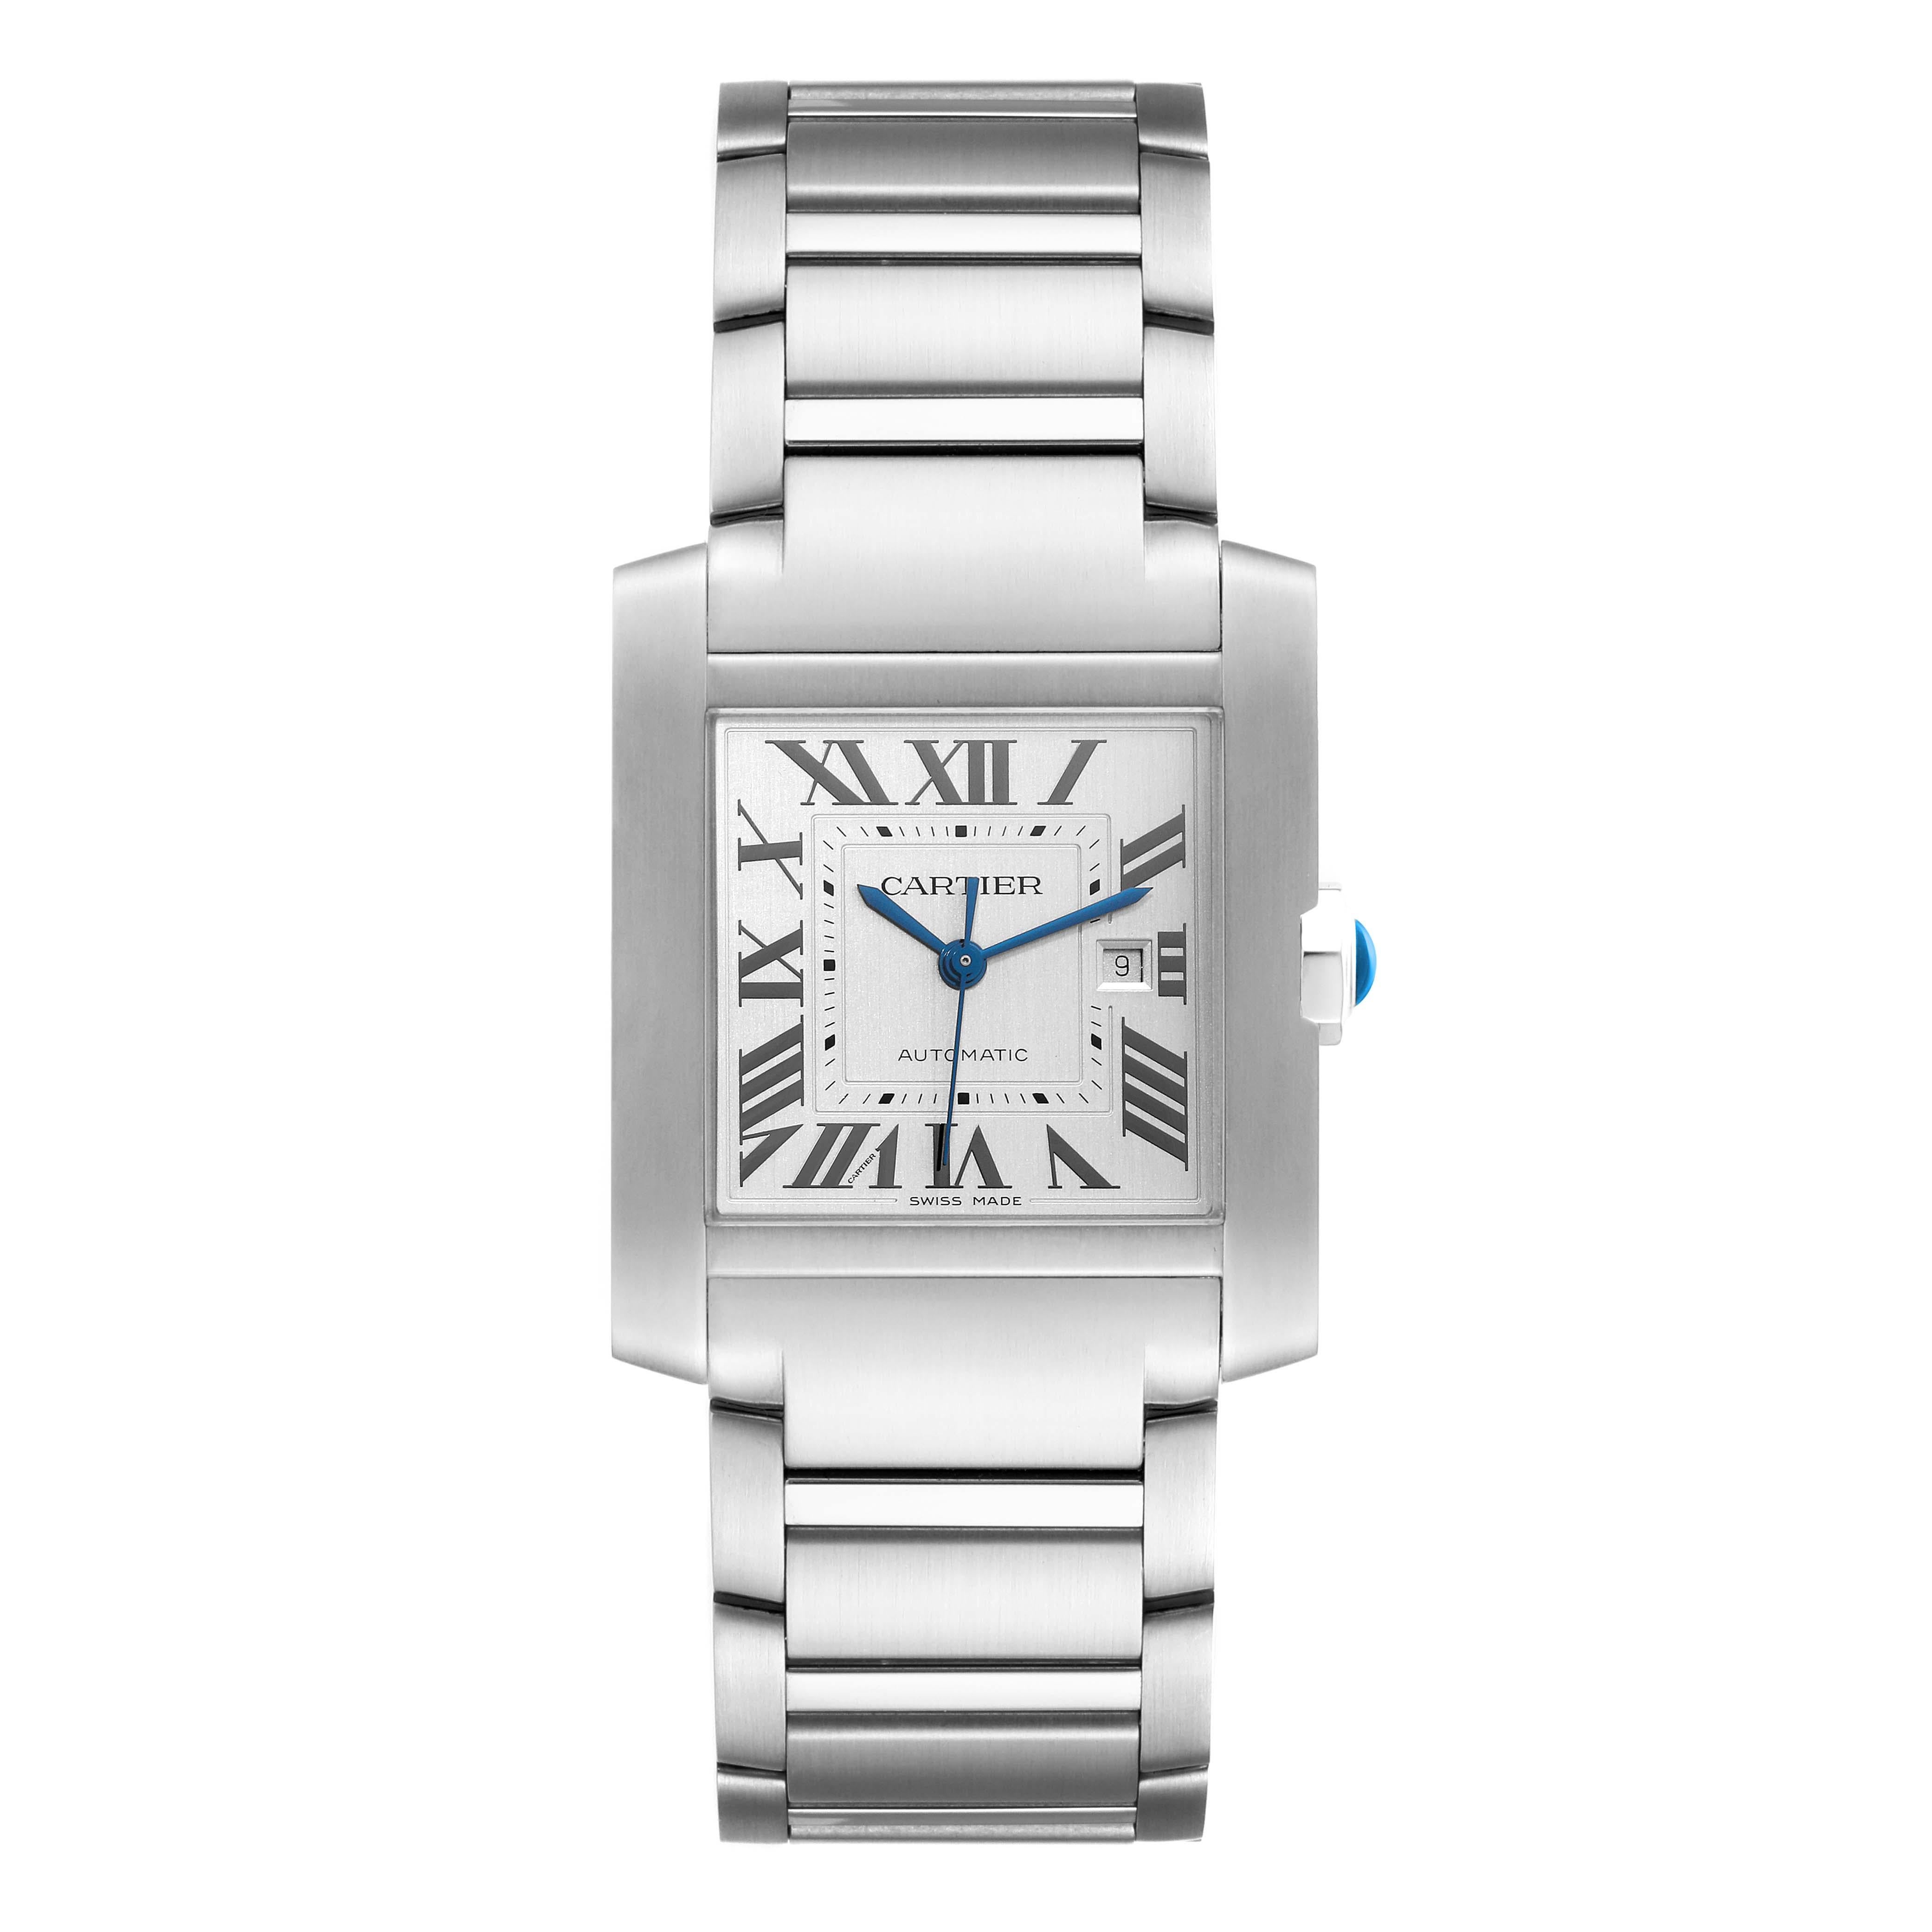 Cartier Tank Francaise Large Automatic Steel Mens Watch WSTA0067 For Sale 1